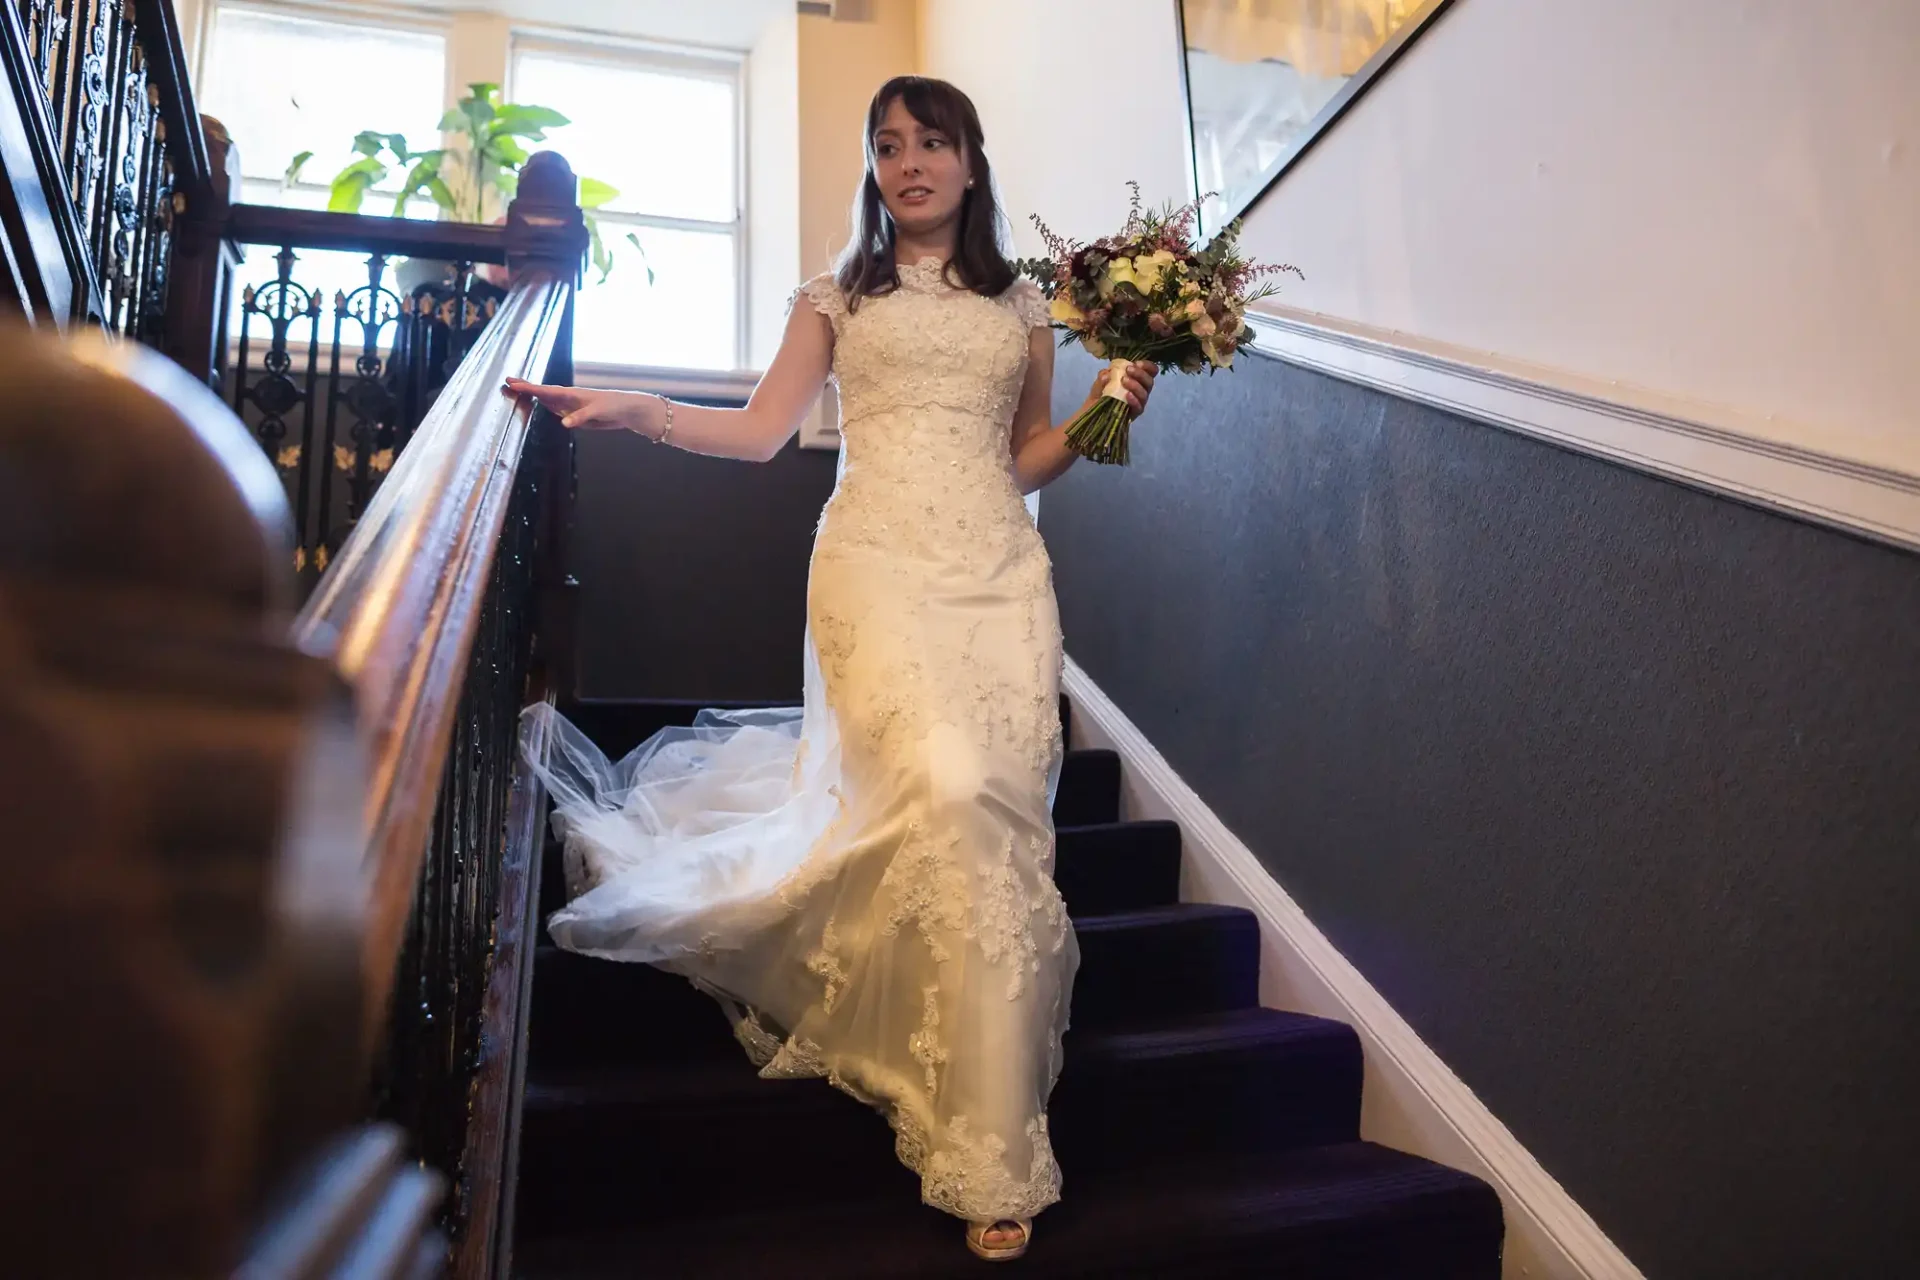 A bride in a white lace dress descends a staircase holding a bouquet, looking towards the camera with a slight smile.